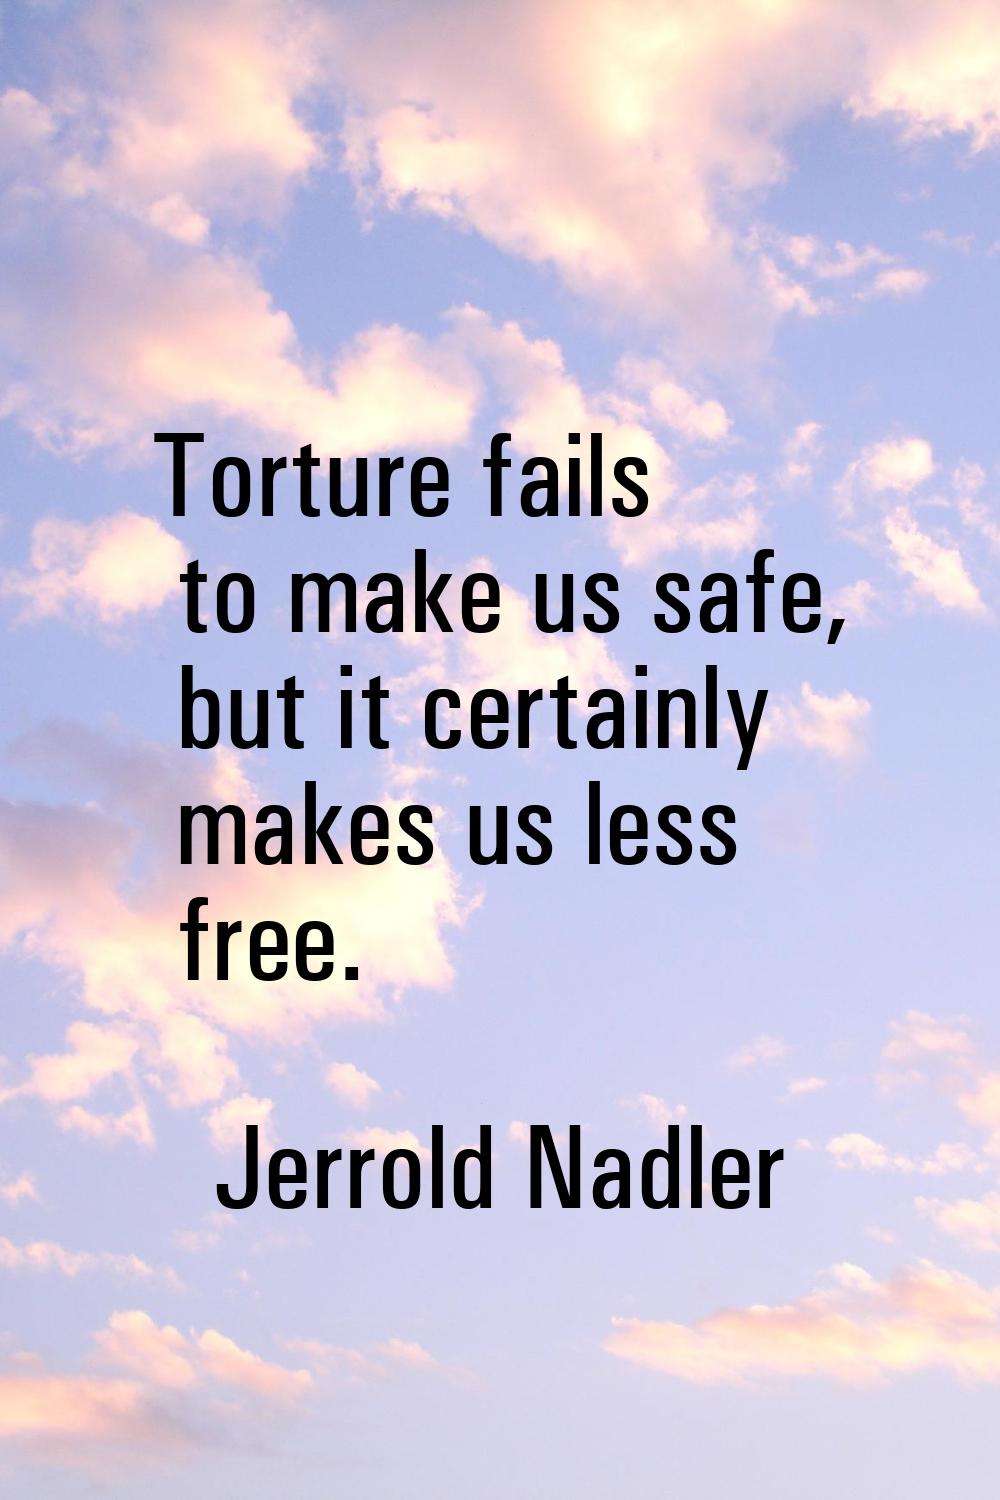 Torture fails to make us safe, but it certainly makes us less free.